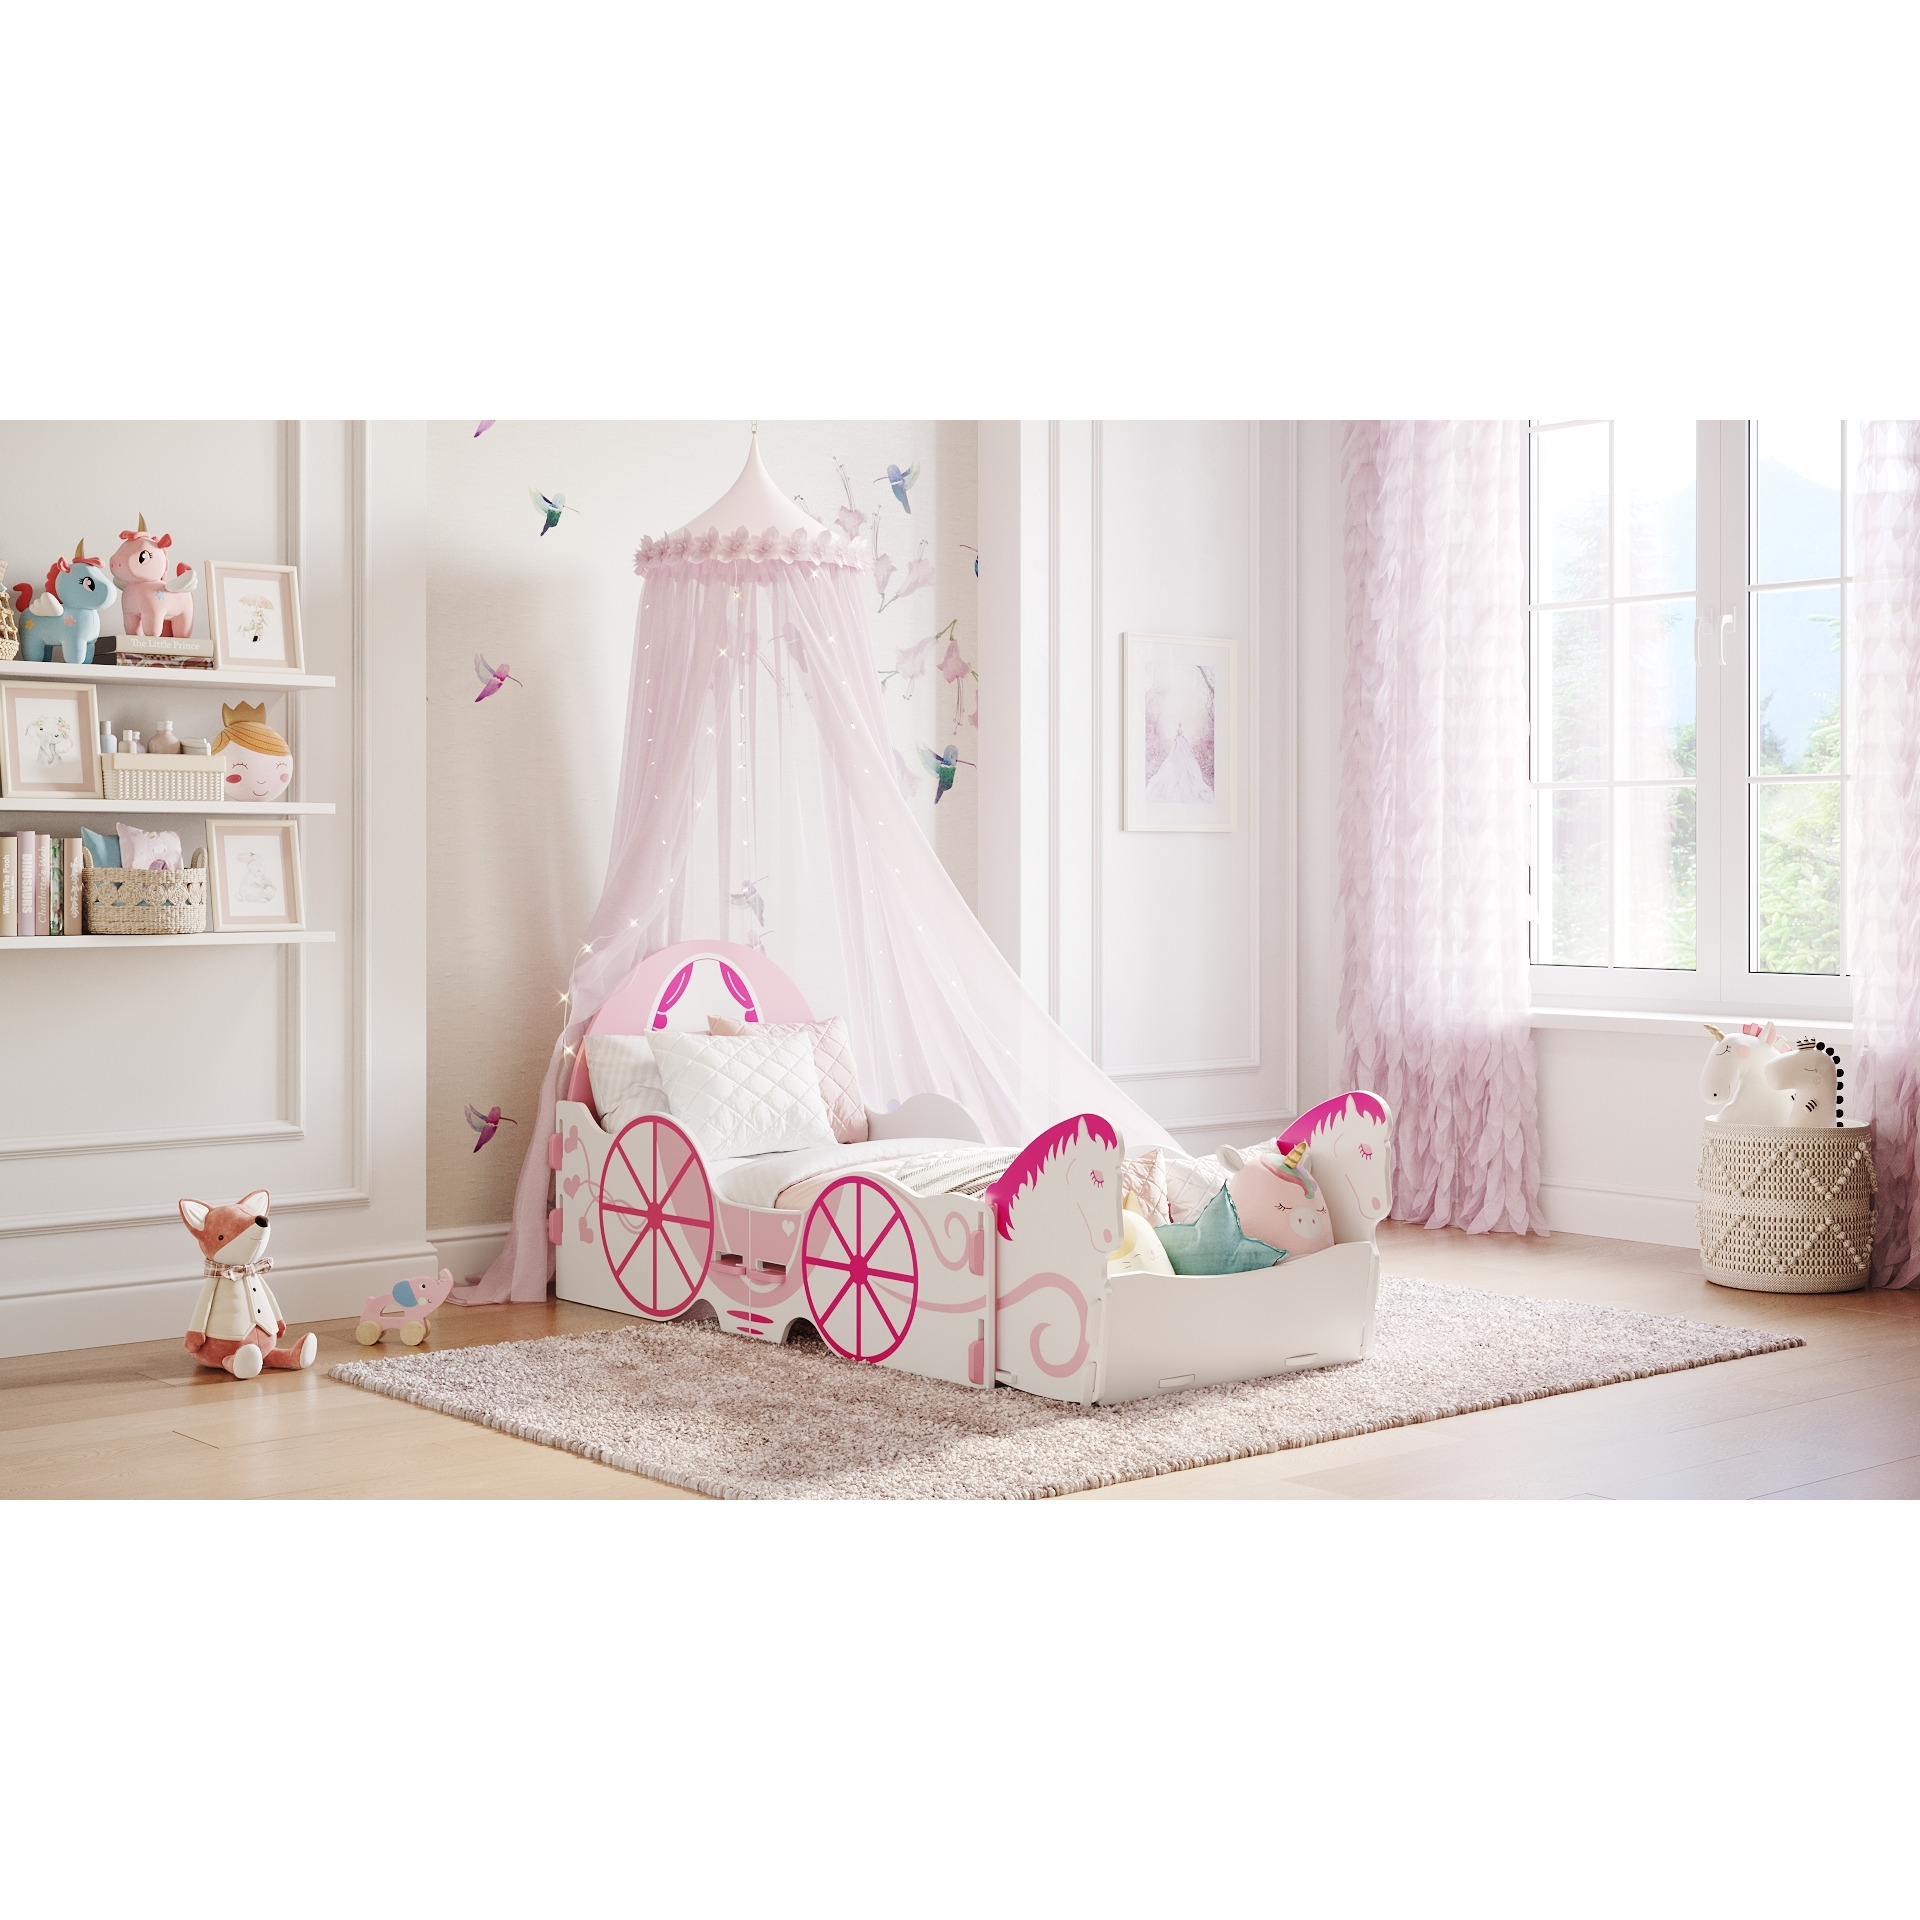 Kidsaw Horse & Carriage Toddler Bed - image 1